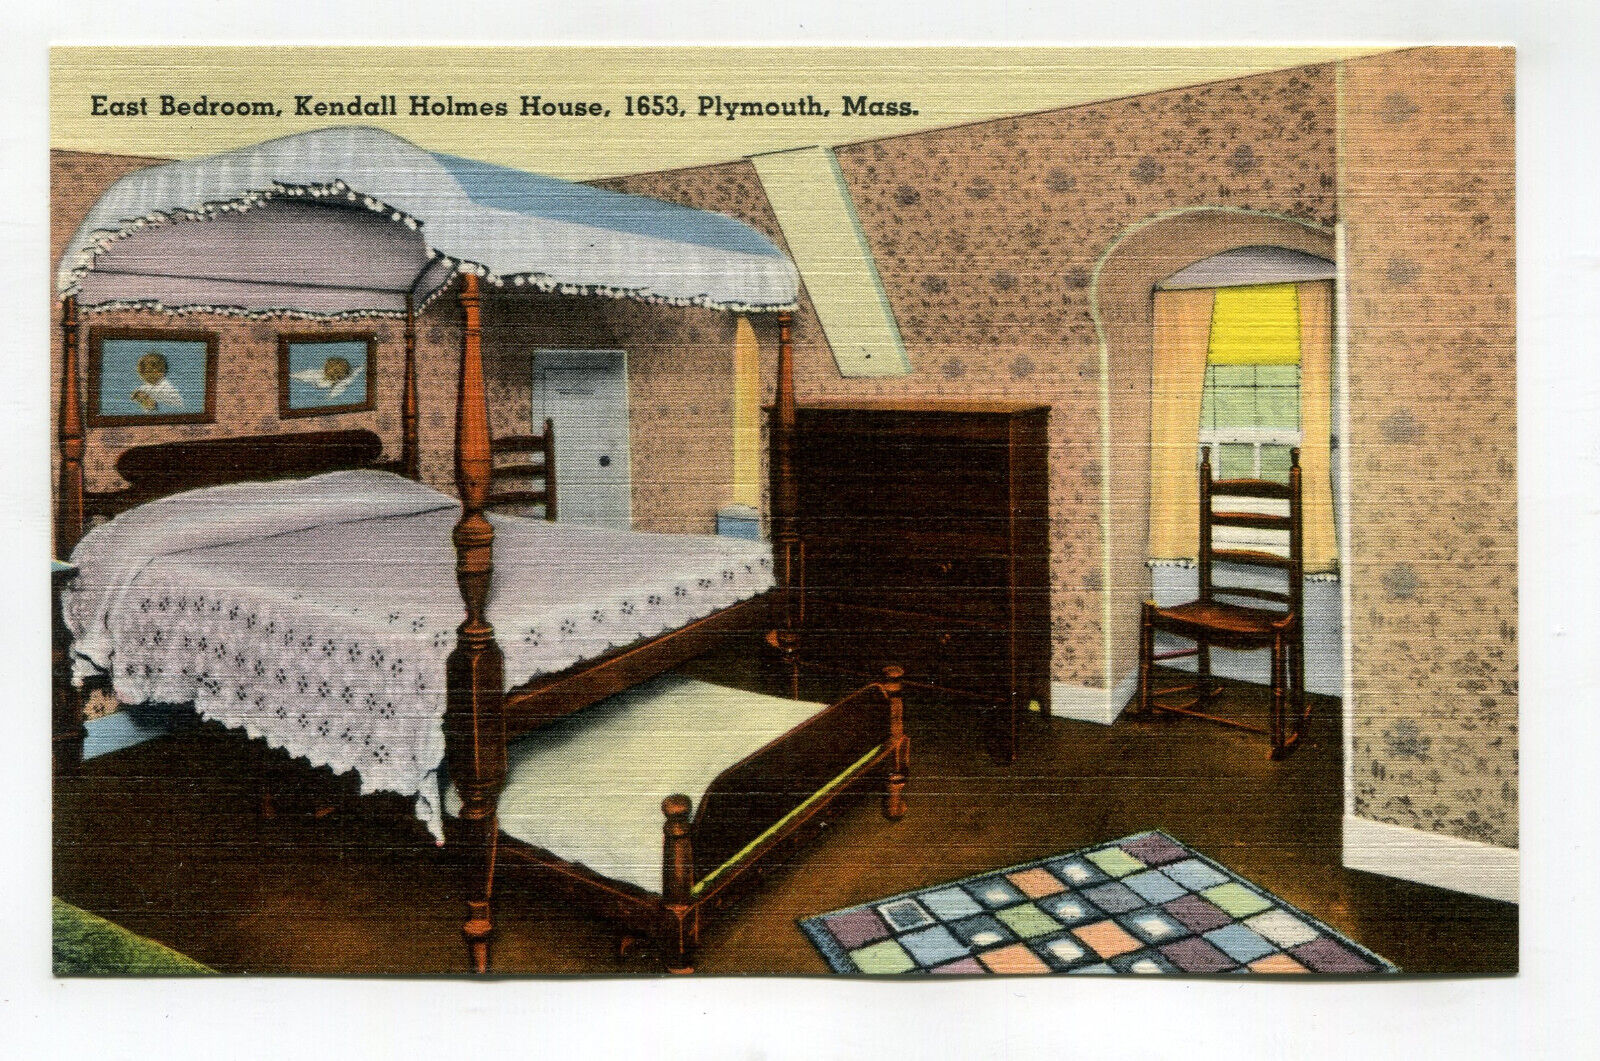 EAST BEDROOM KENDALL HOLMES HOUSE 1653 PLYMOUTH MASS